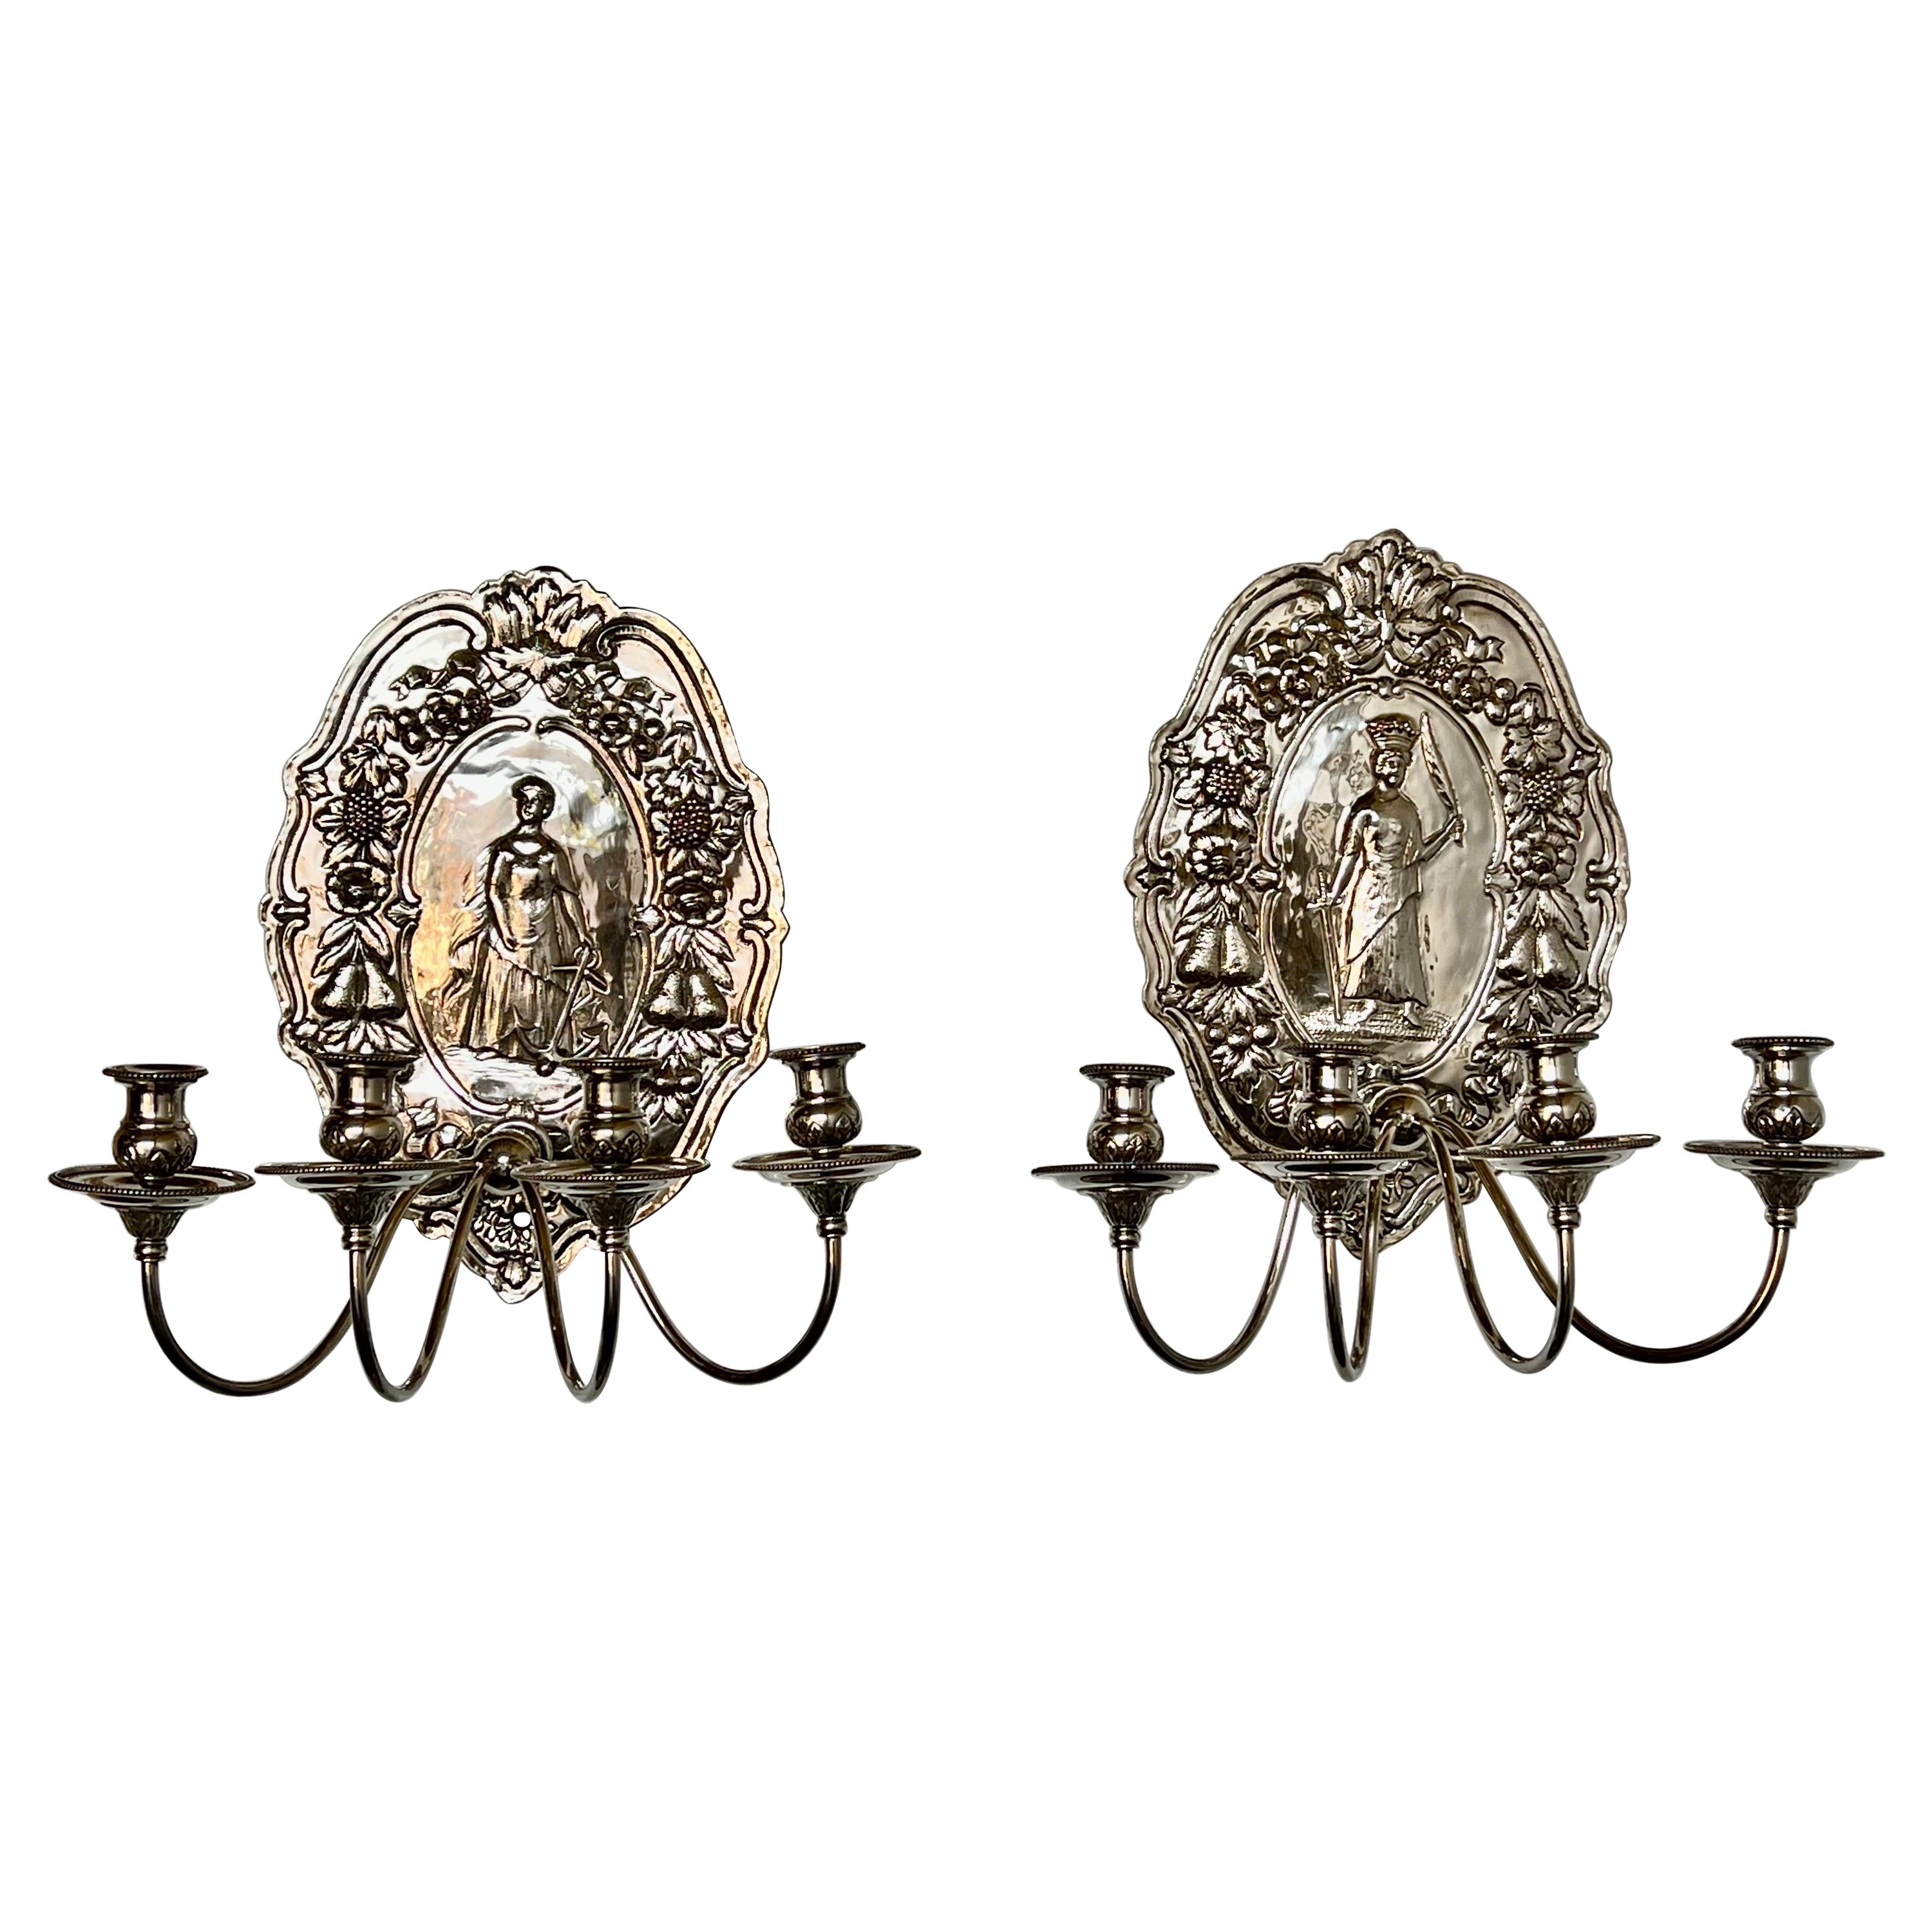 Pair of 19th C. English Silvered Sconces For Sale